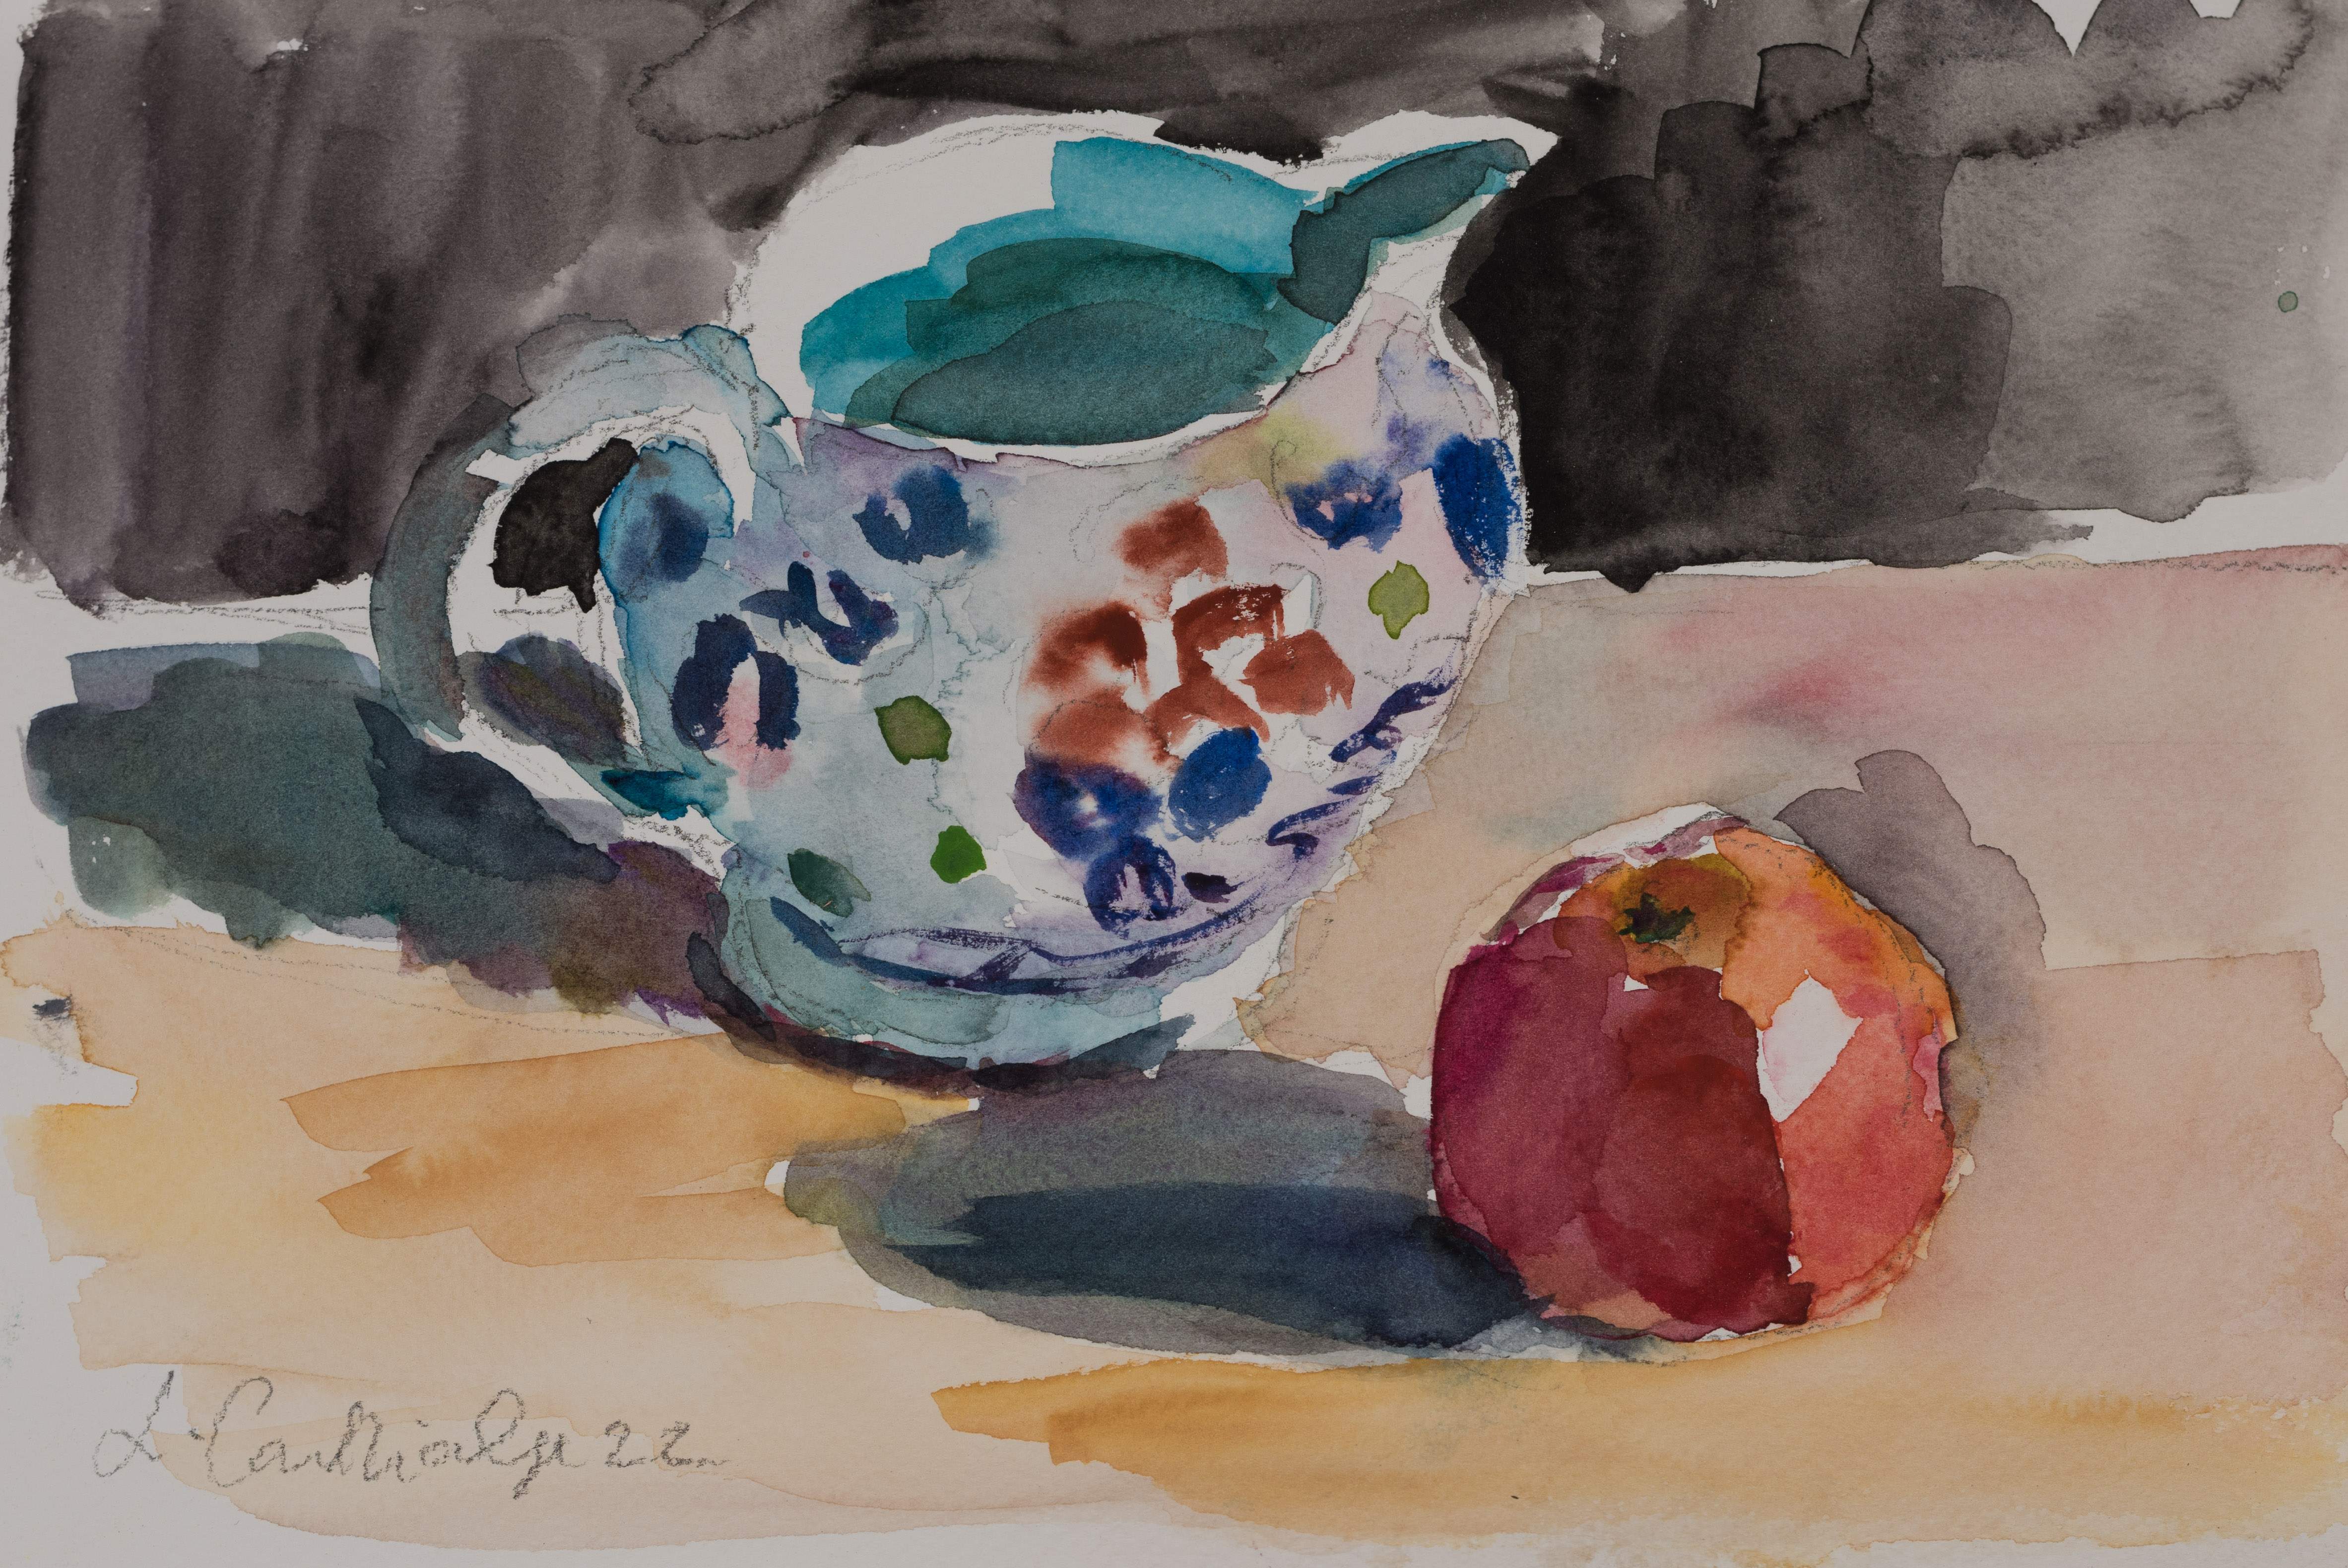 Patterned Jug and Apple